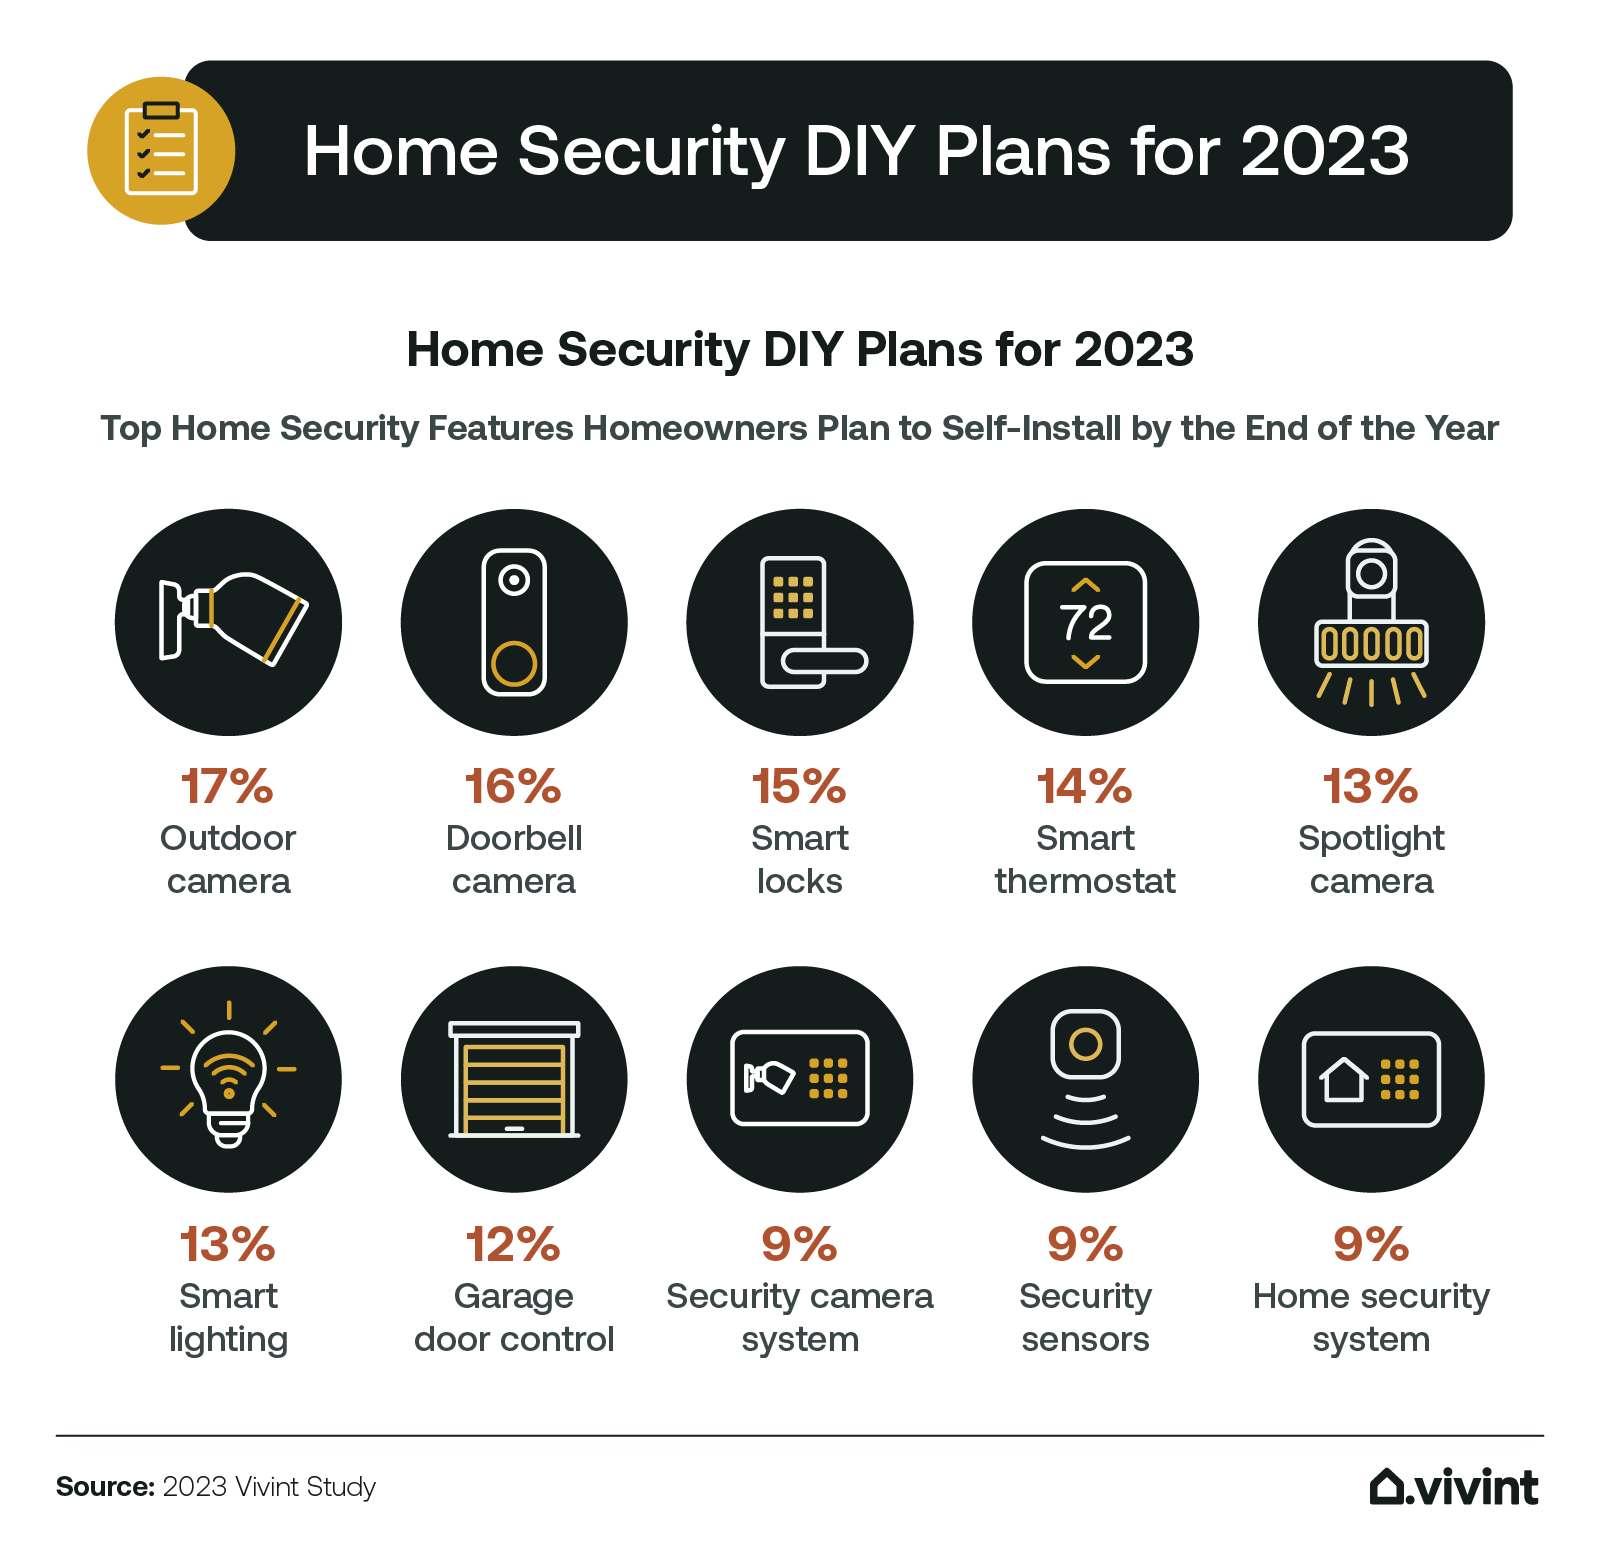 Information about home security DIY plans for 2023.